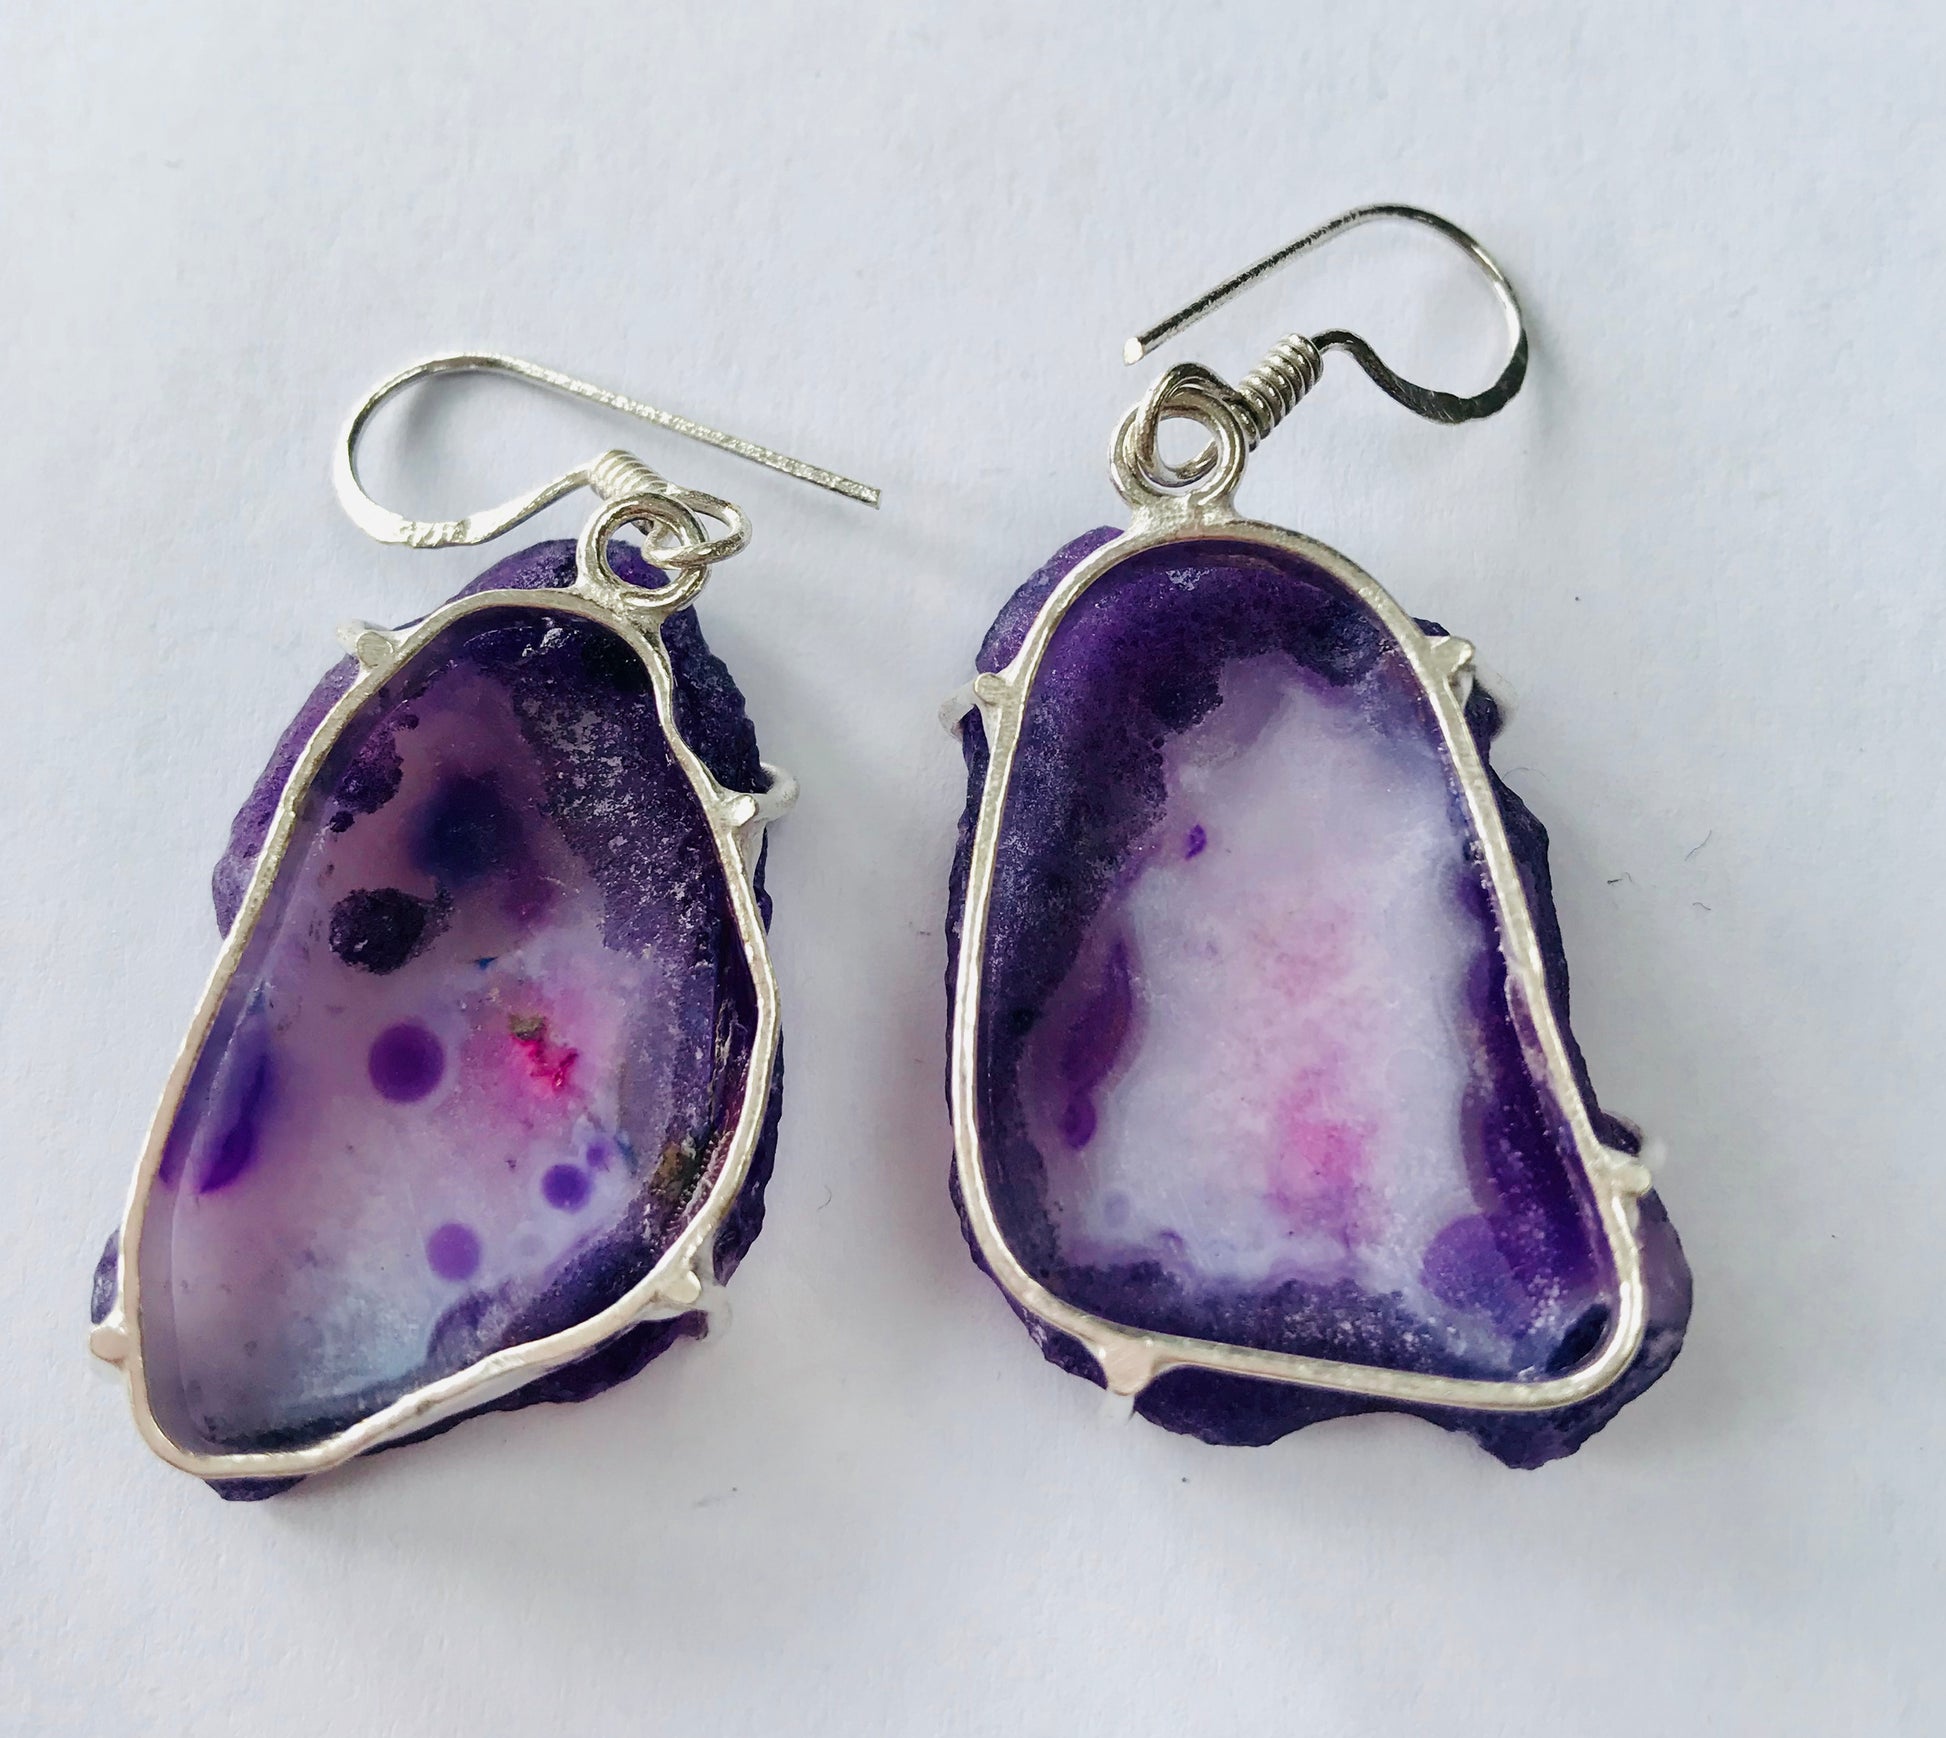 Druzy Crystal Geode Slice Gemstone Earrings Purple Collection - Crystal Boutique.co.uk 